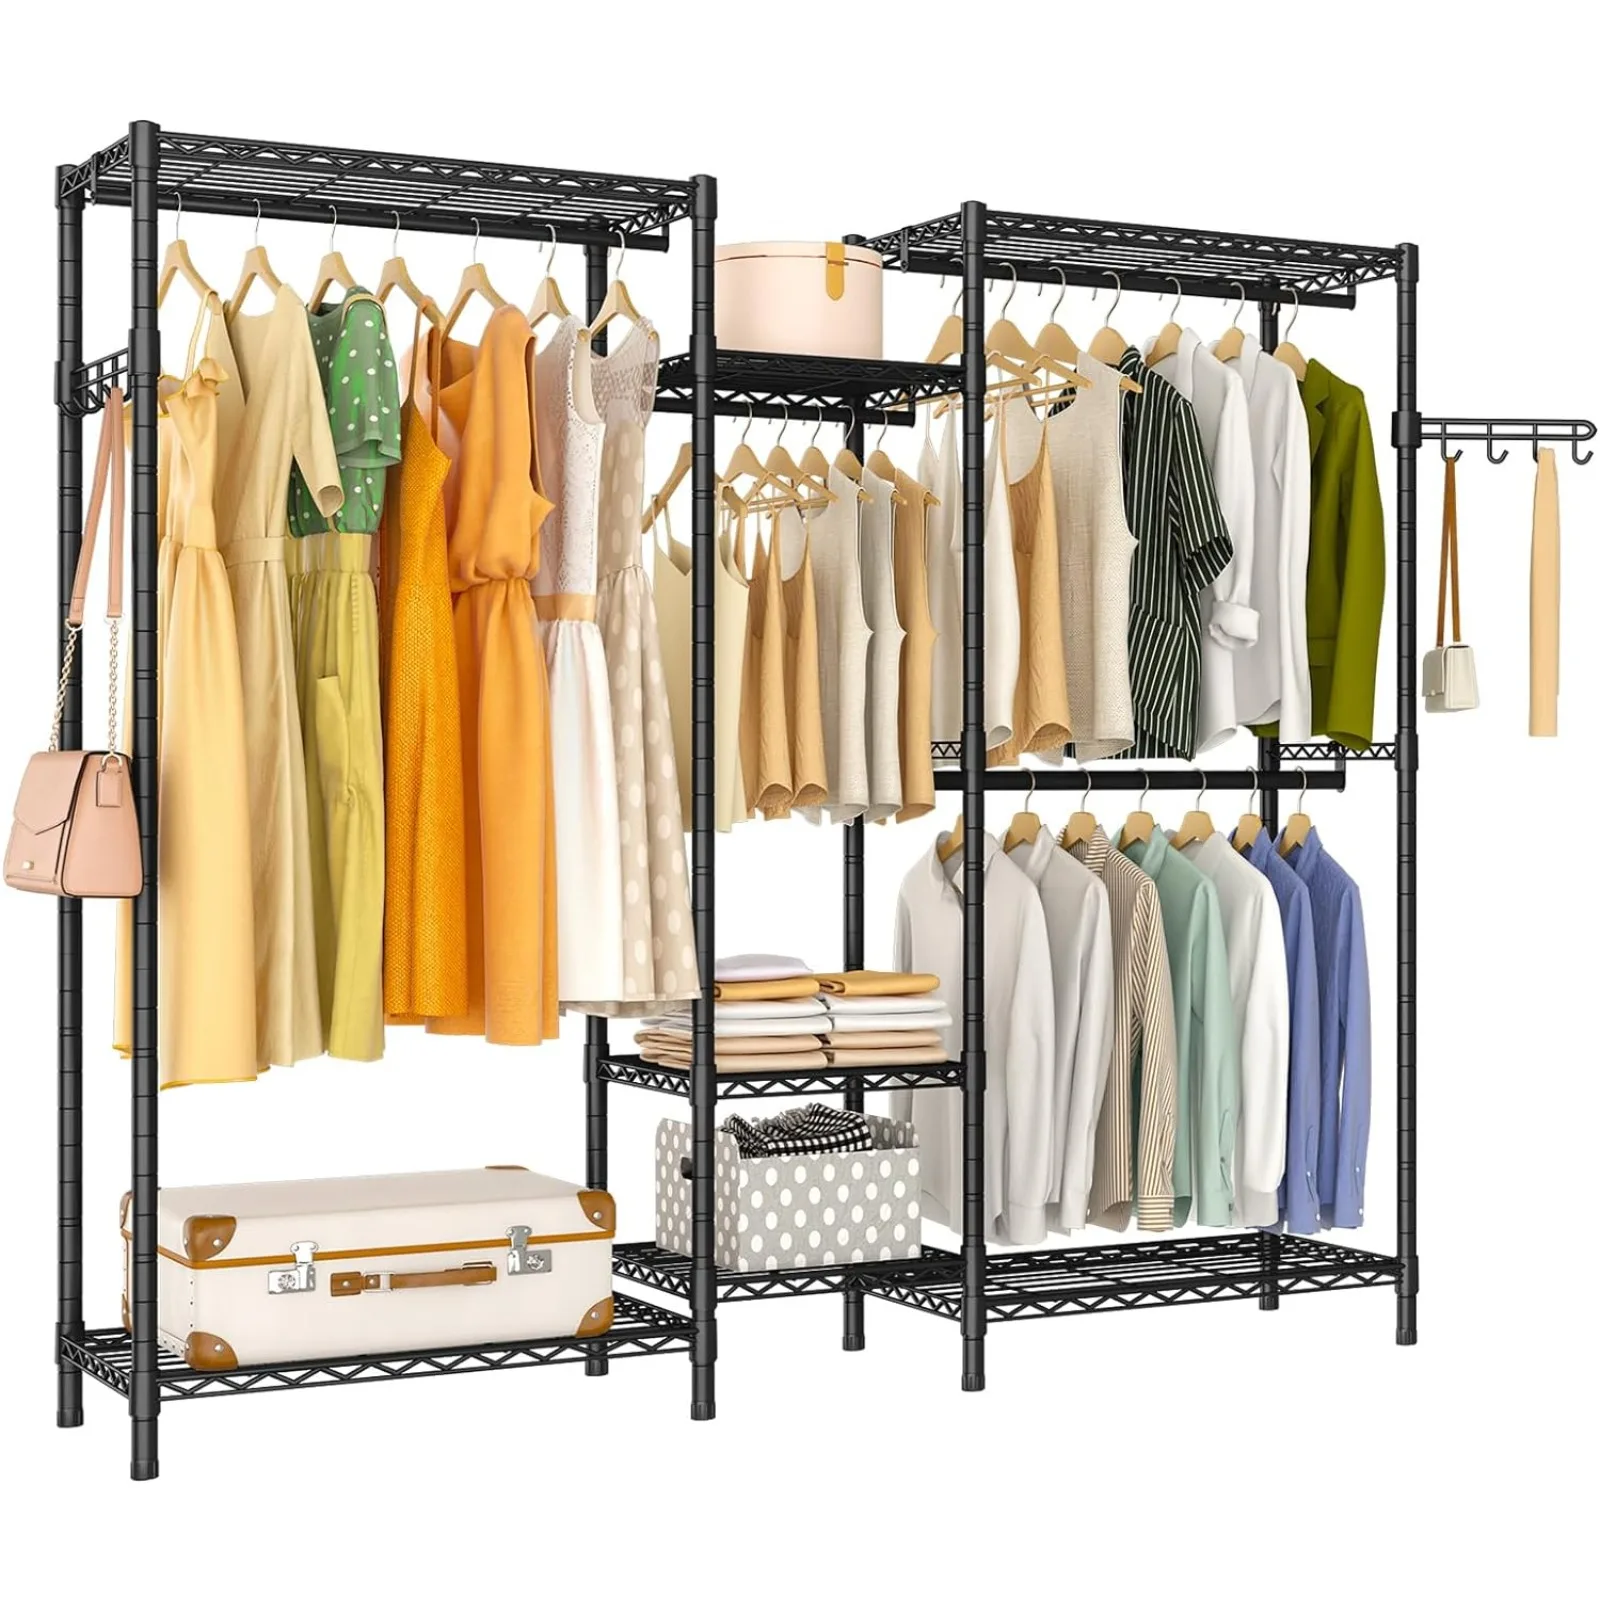 

Free shipping US Heavy Duty Garment Rack, Portable Wardrobe Clothes Rack Freestanding Adjustable Clothing Rack with 7 Tiers